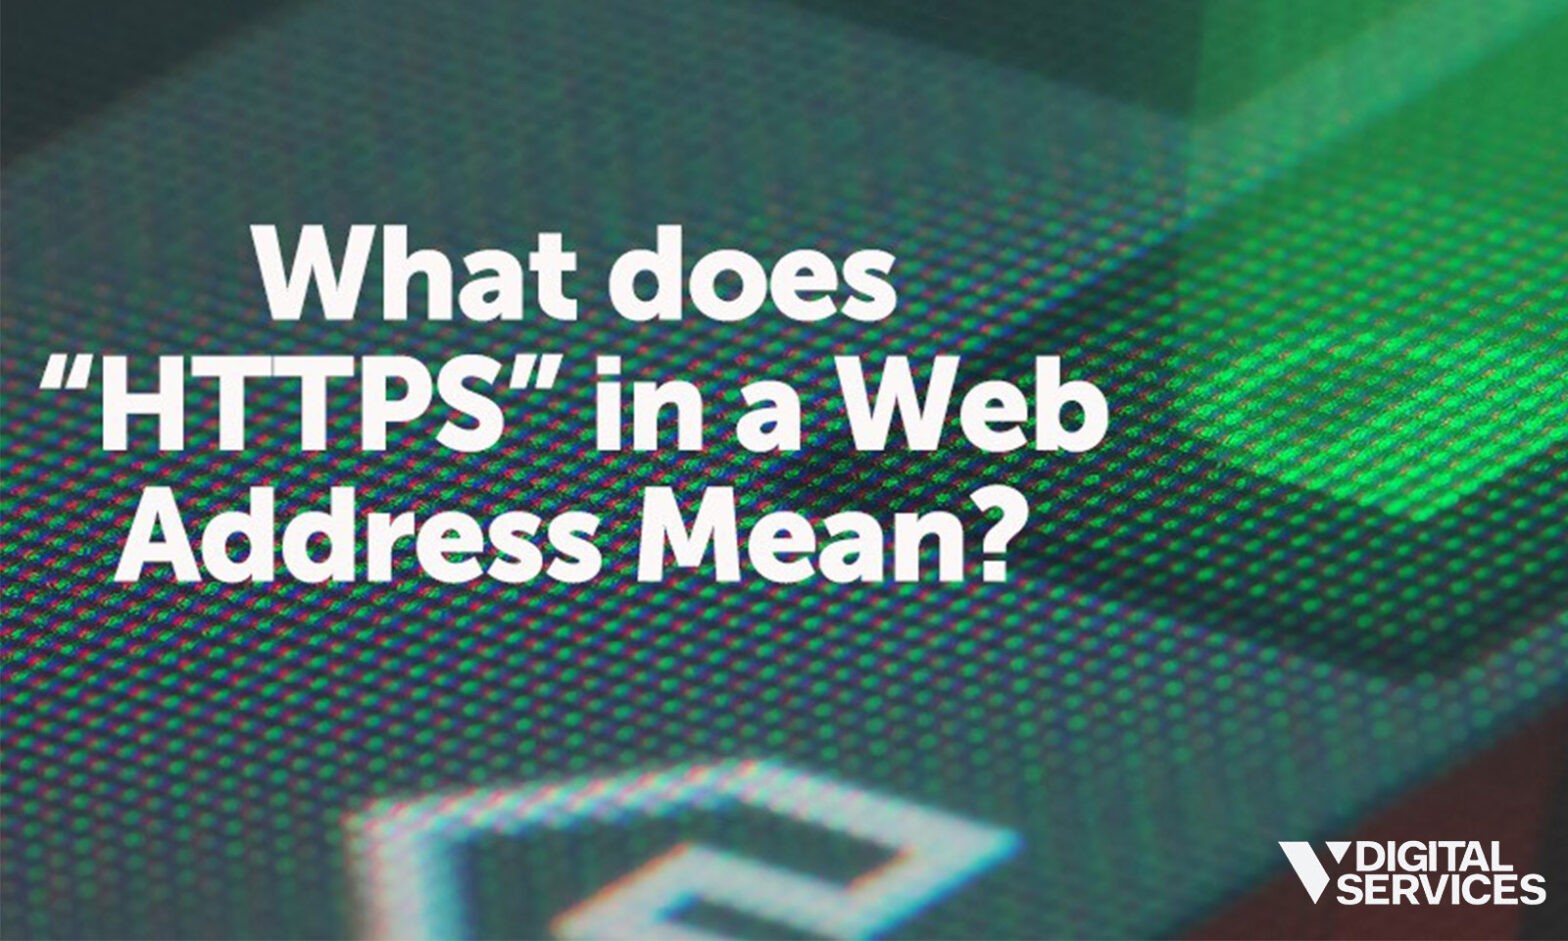 Featured image for post: What does “HTTPS” in a web address mean?